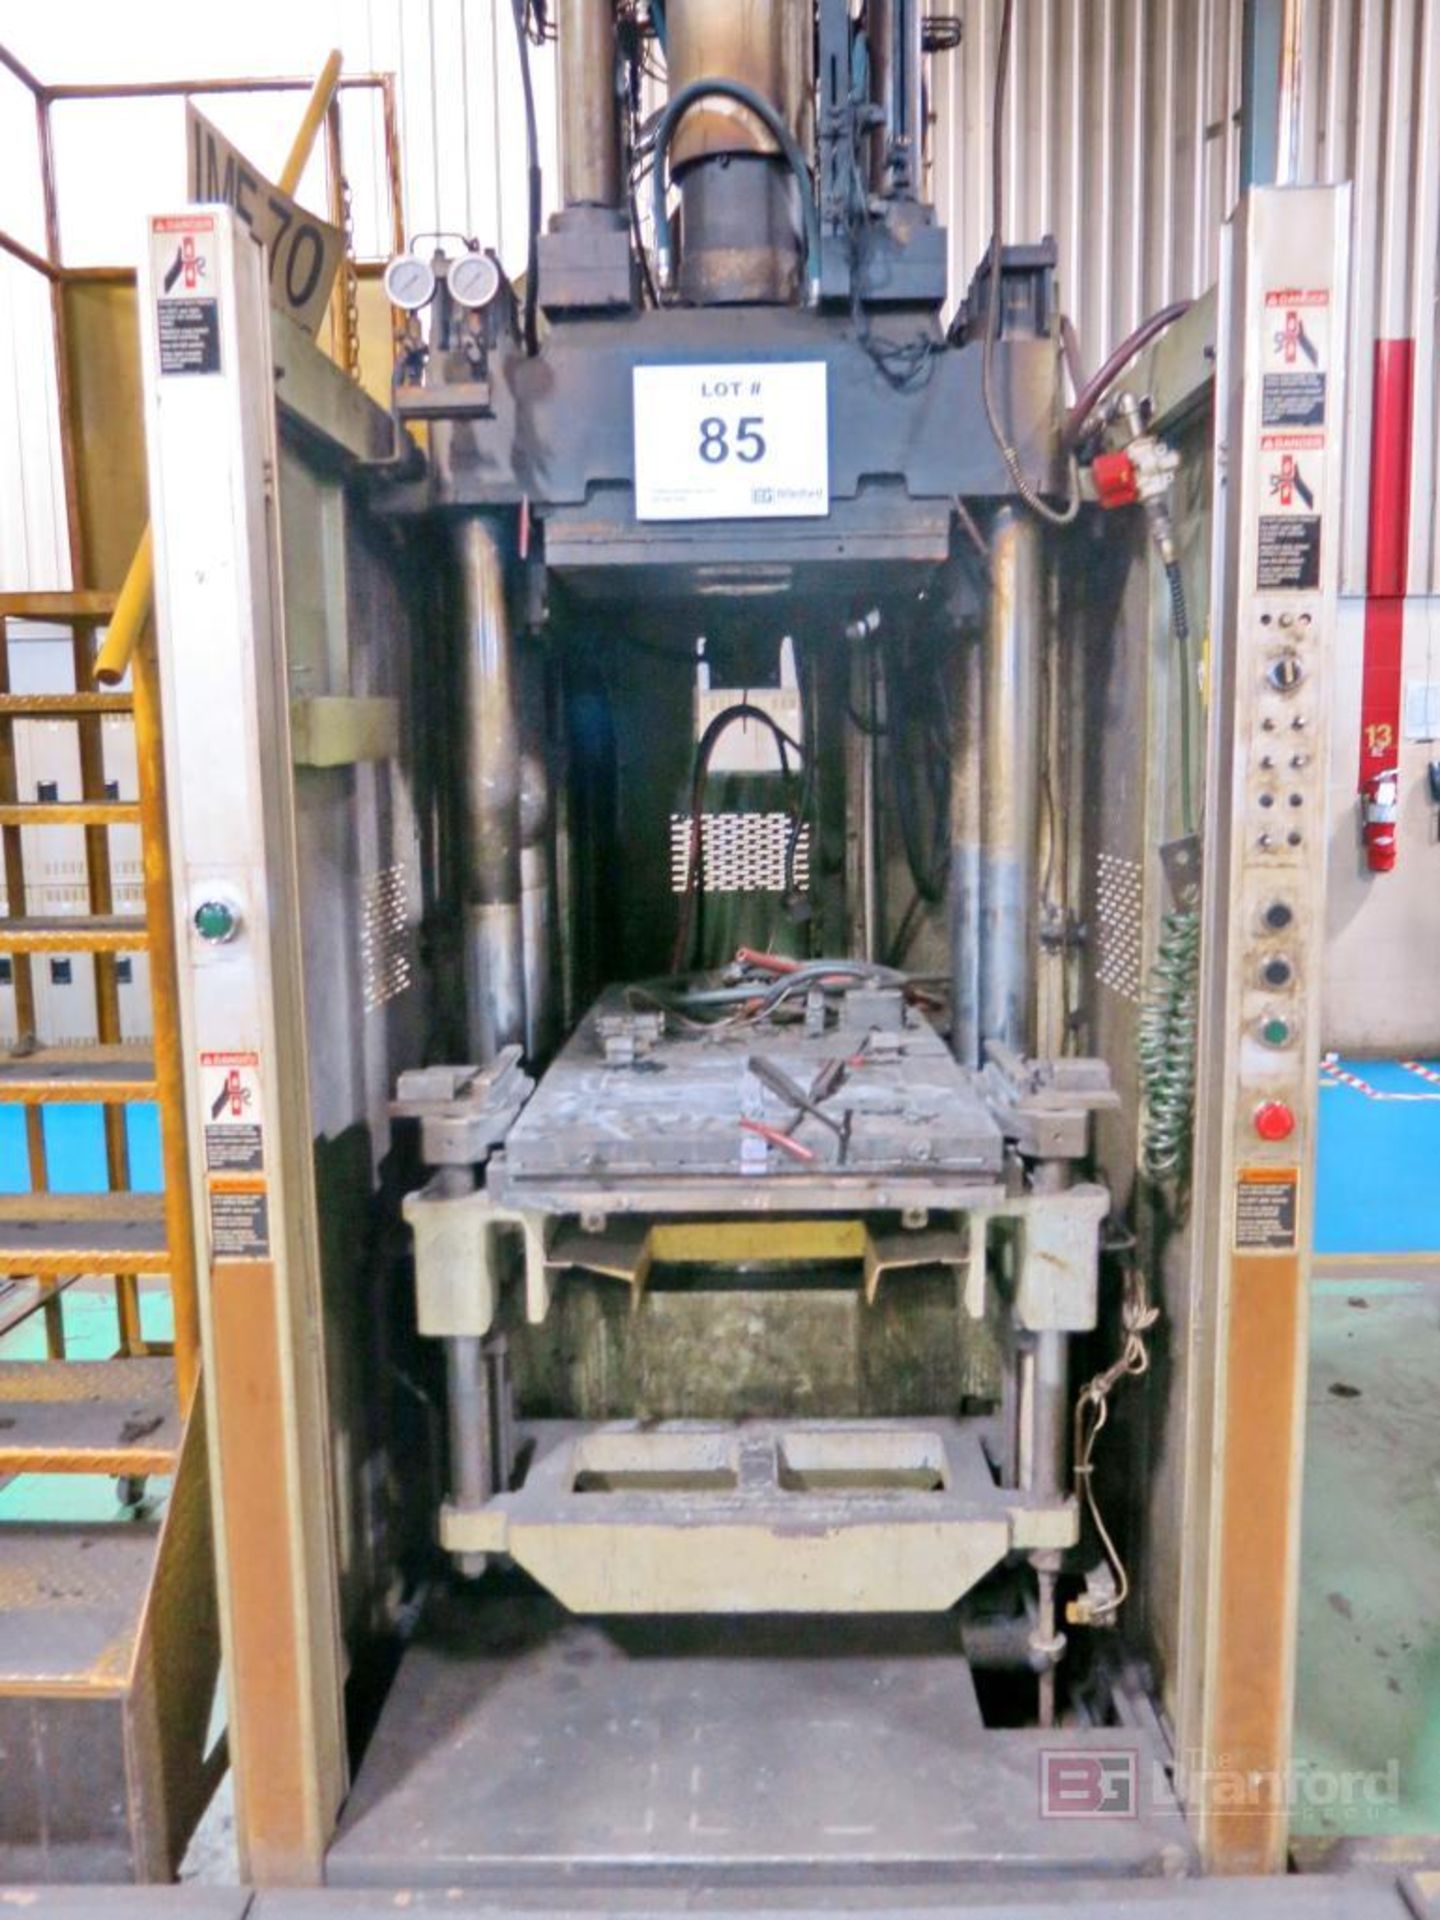 Sanyu 1.6L Vertical Rubber Injection Molding Machine - Image 3 of 5